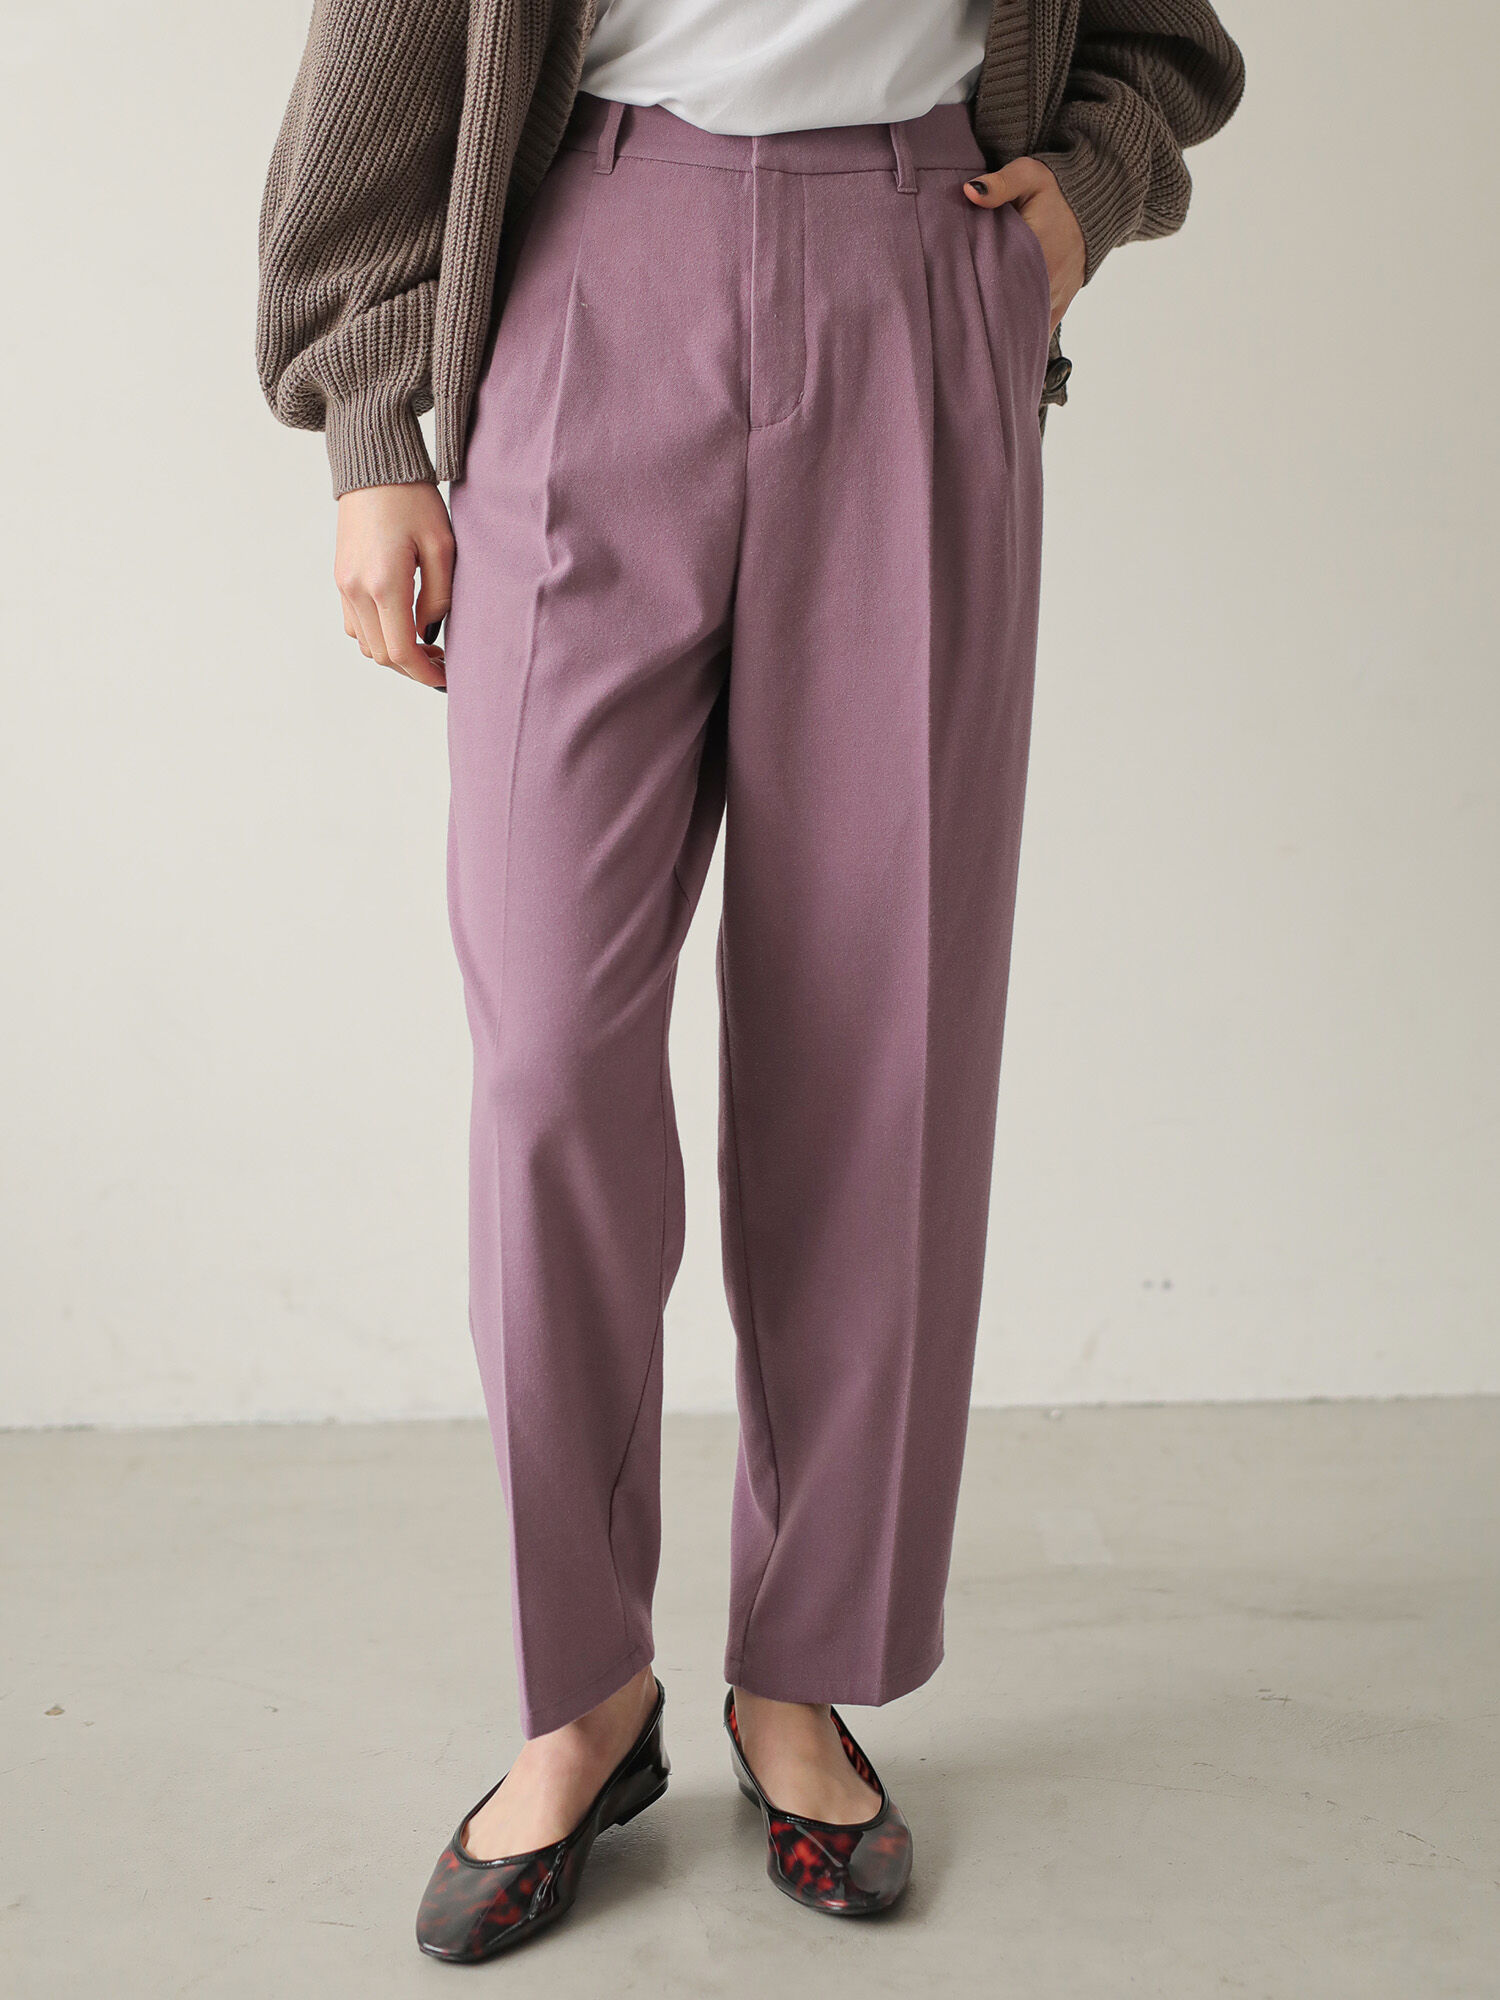 Dixie Cotton Pants in Tan Slacks and Chinos Capri and cropped trousers Womens Clothing Trousers Natural 